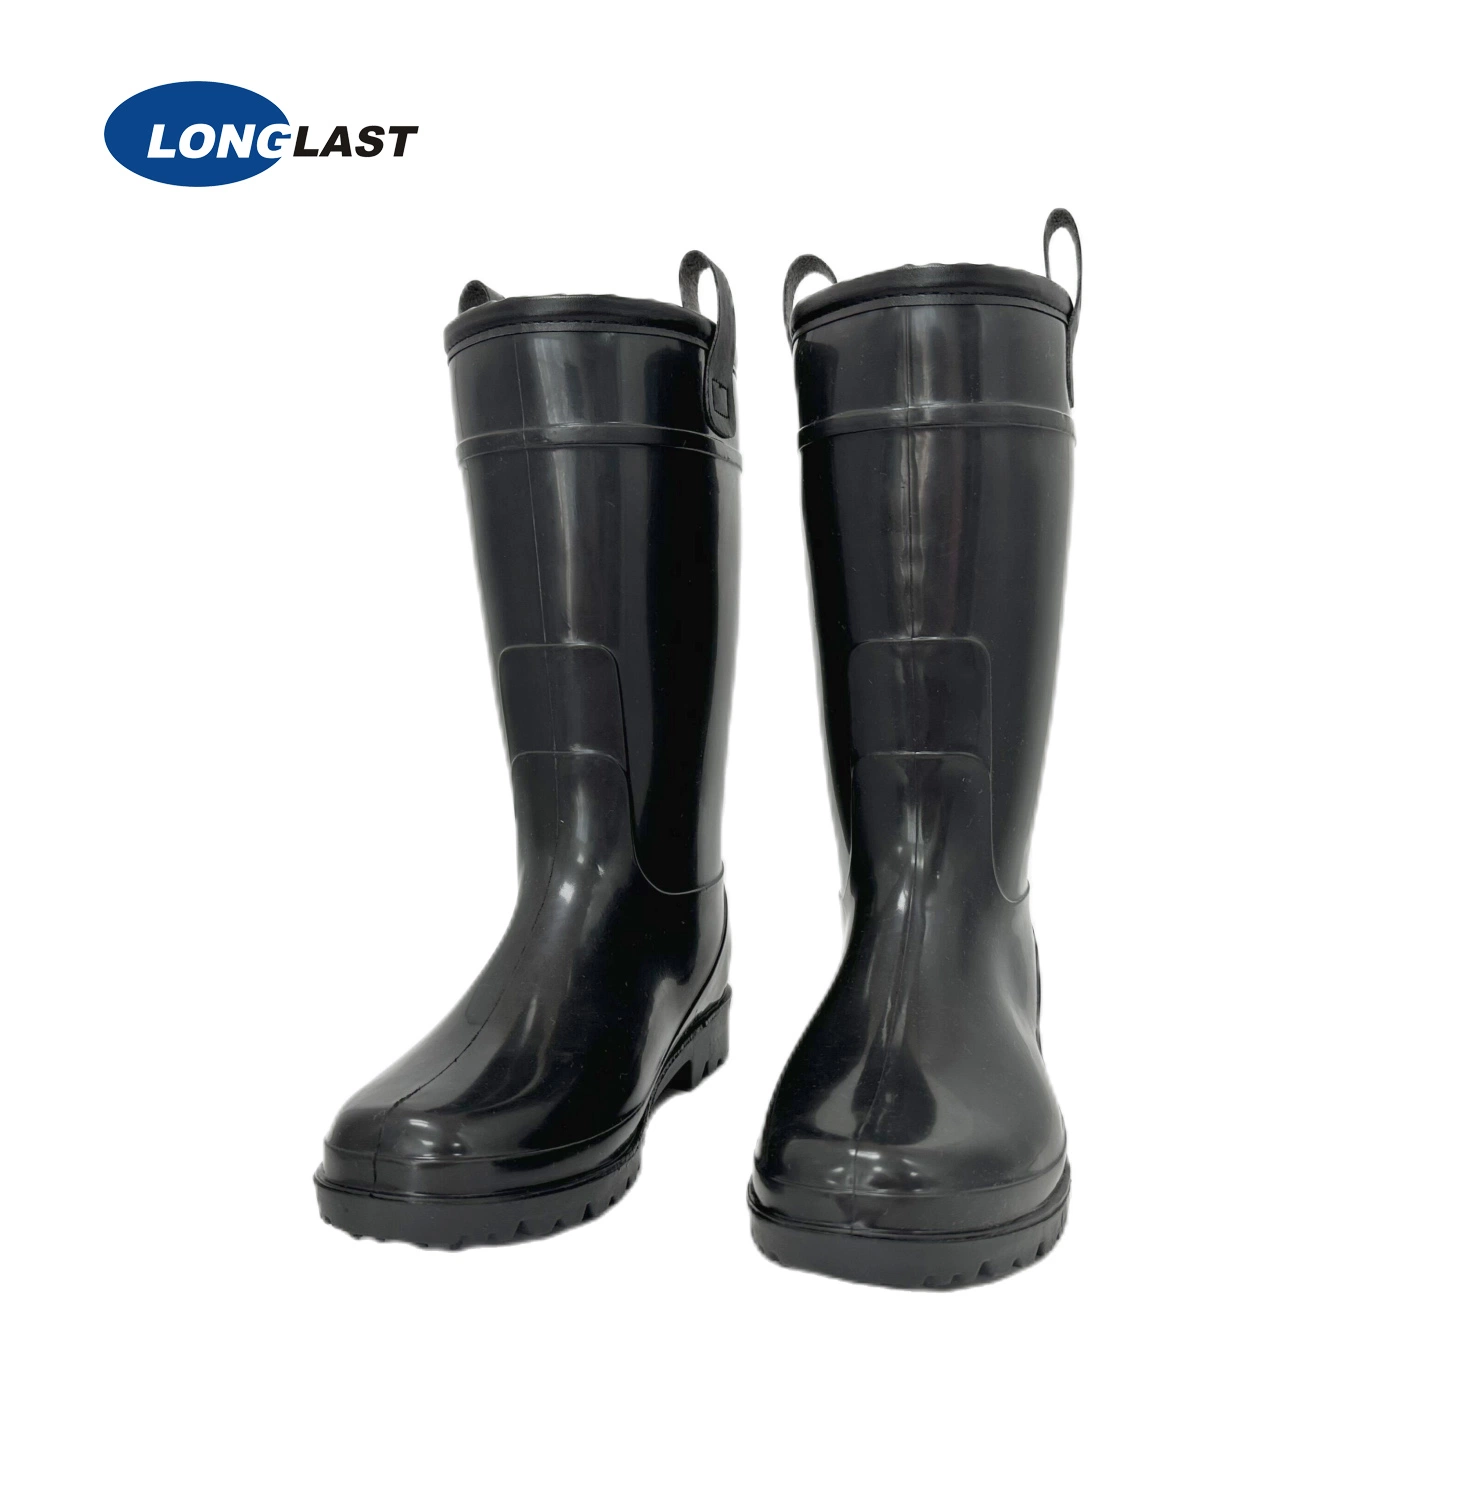 Waterproof Safety Rain Boot PVC/Industry Safety Rain Boots/Good Quality LR-1-03